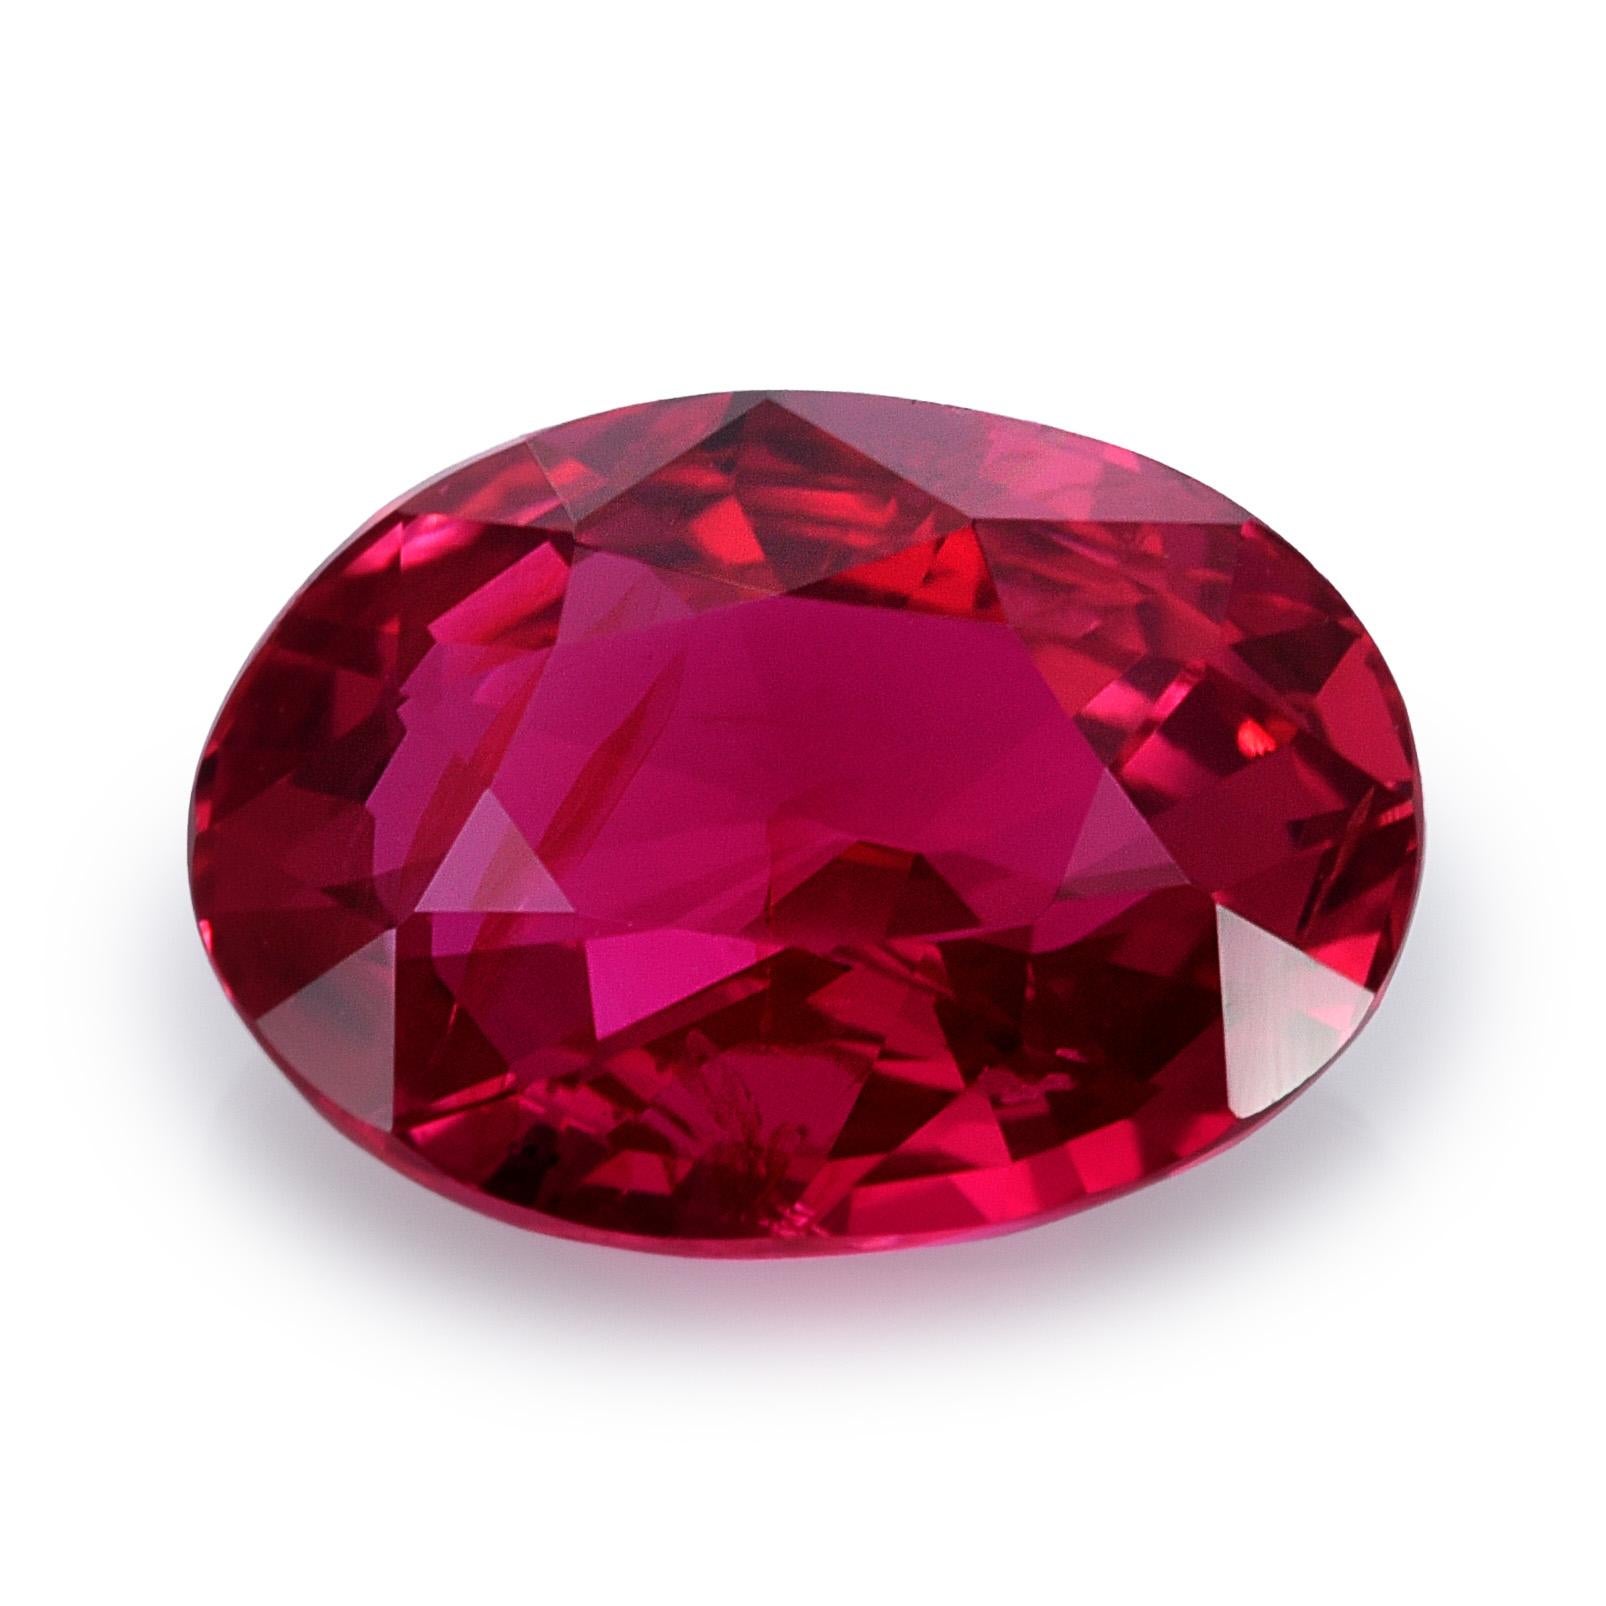 Women's or Men's GIA Certified 1.24 Carats Unheated Mozambique Ruby For Sale